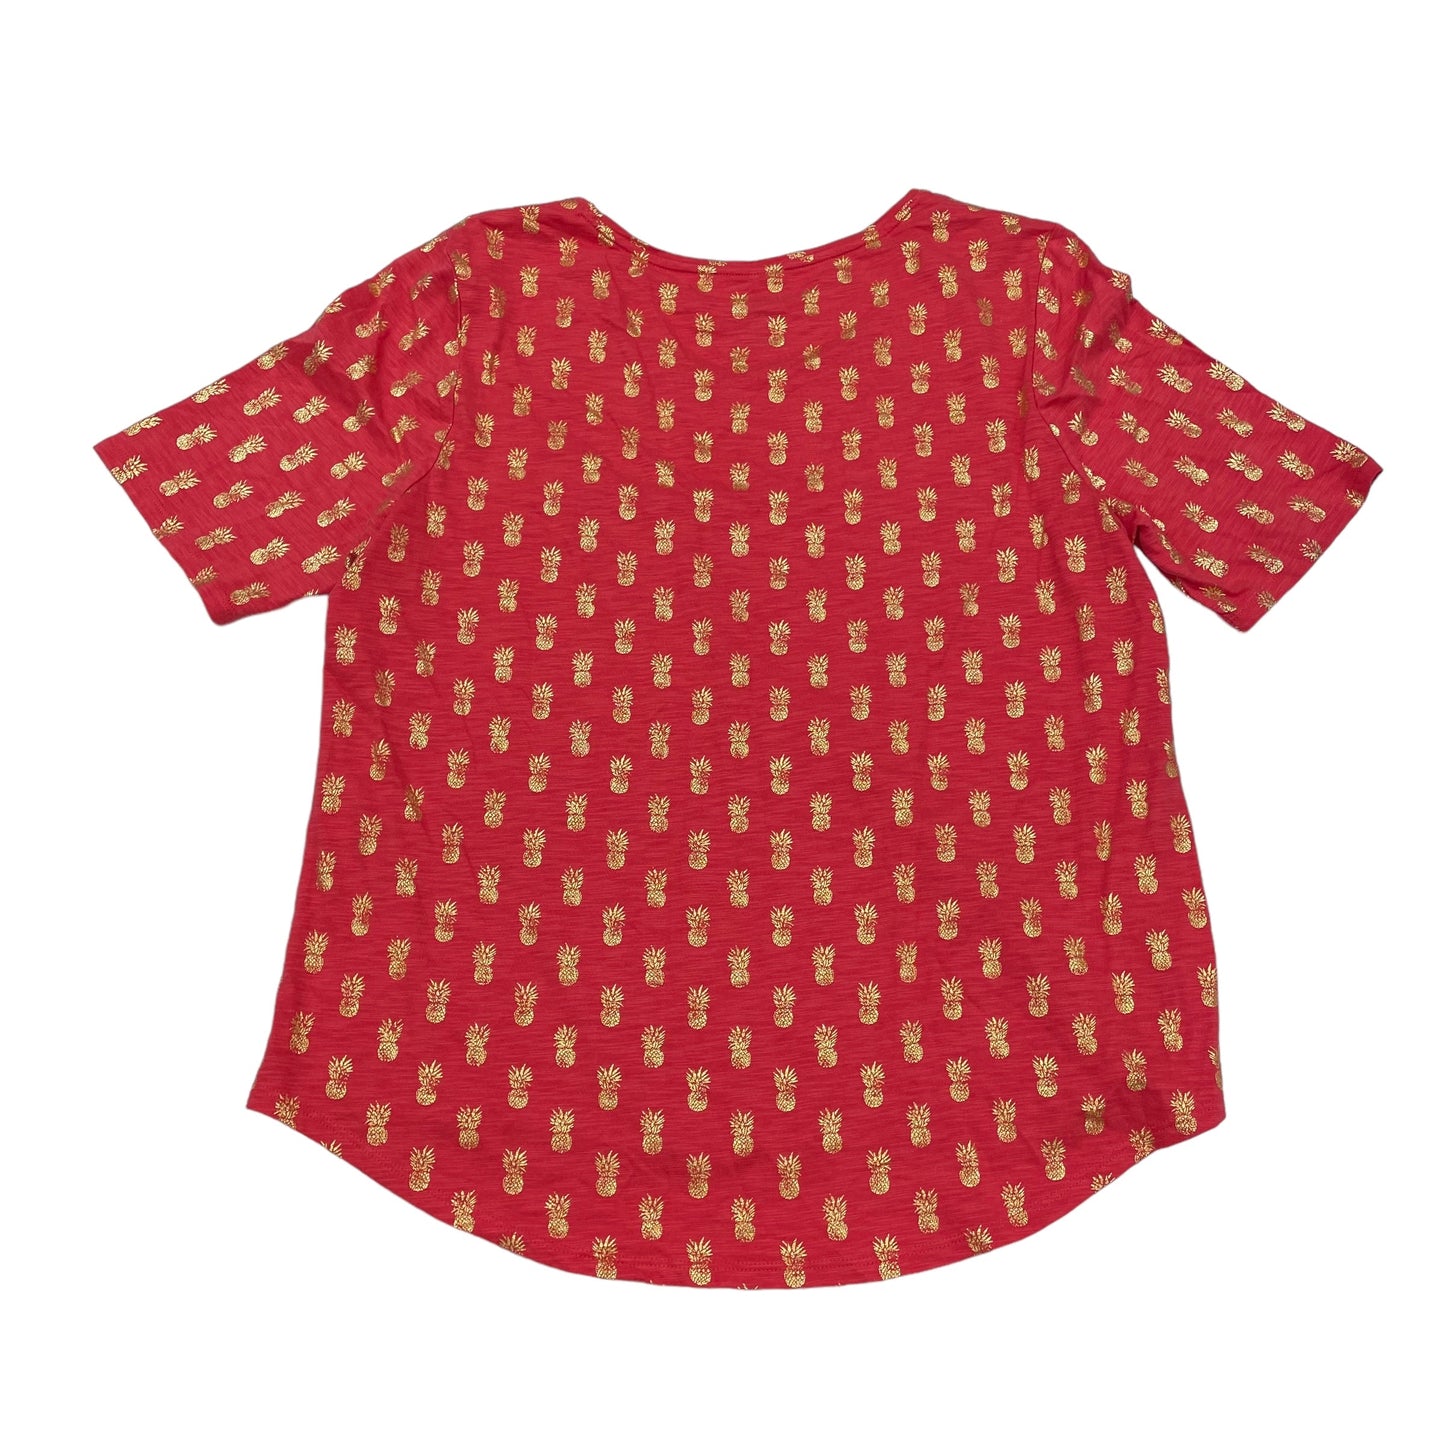 RED CHICOS TOP SS, Size L